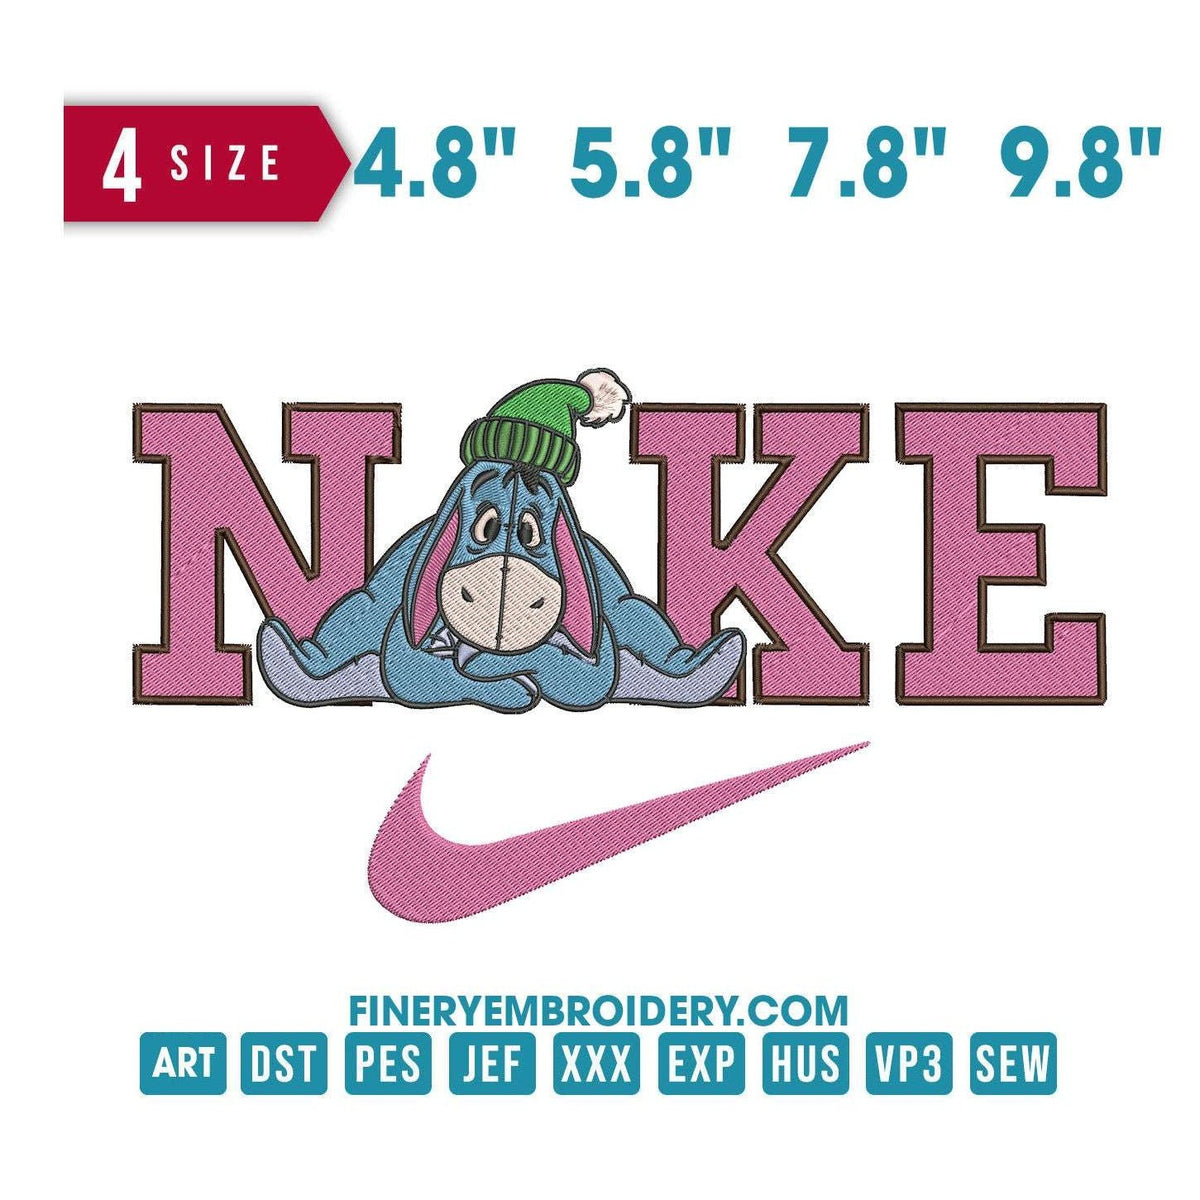 Nike Eeyore - Winnie the Pooh's Iconic Friend - Embroidery Design FineryEmbroidery